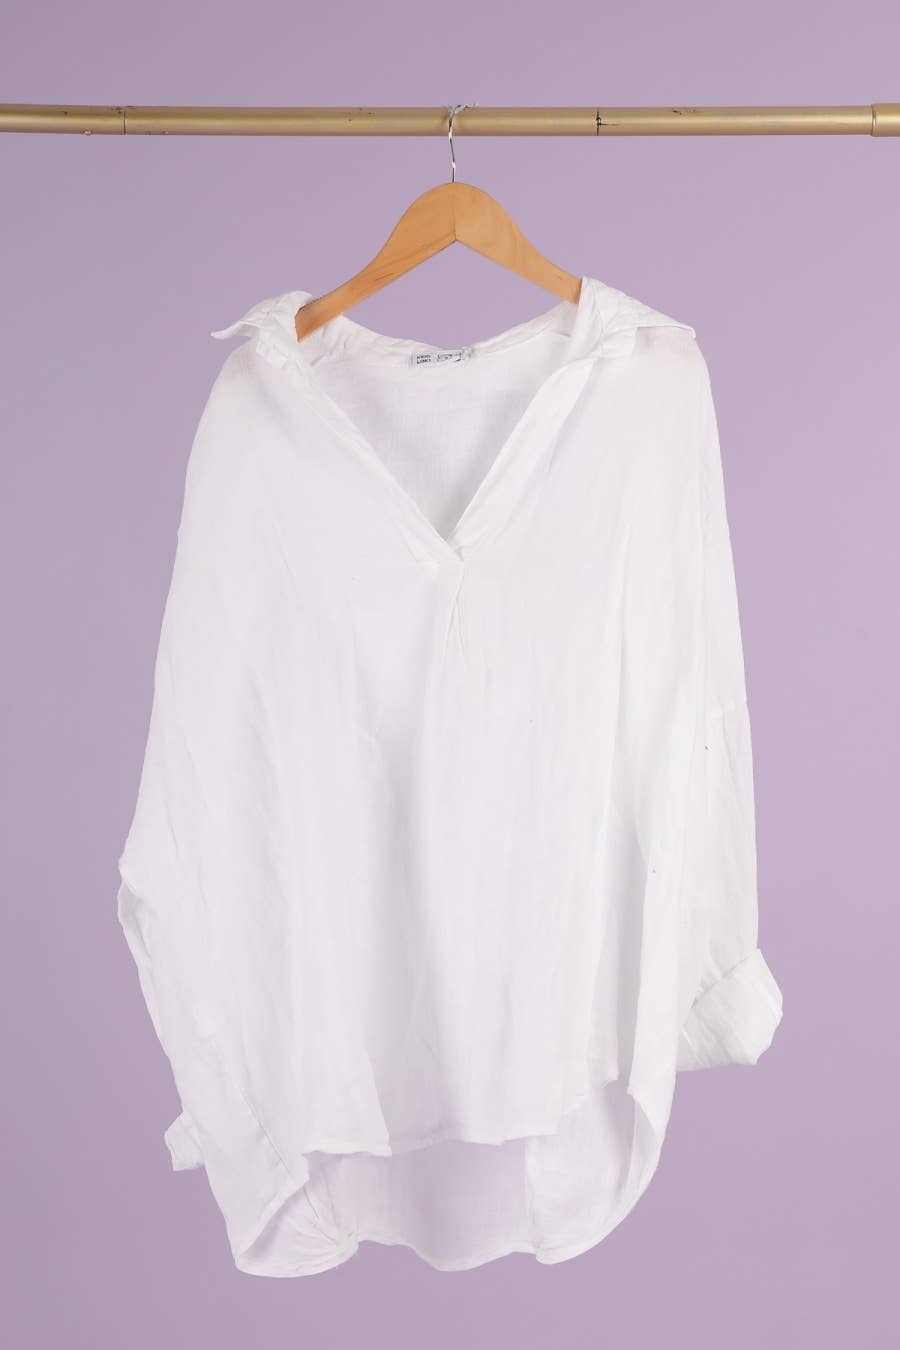 blouse 688179 100% linen made in Italy